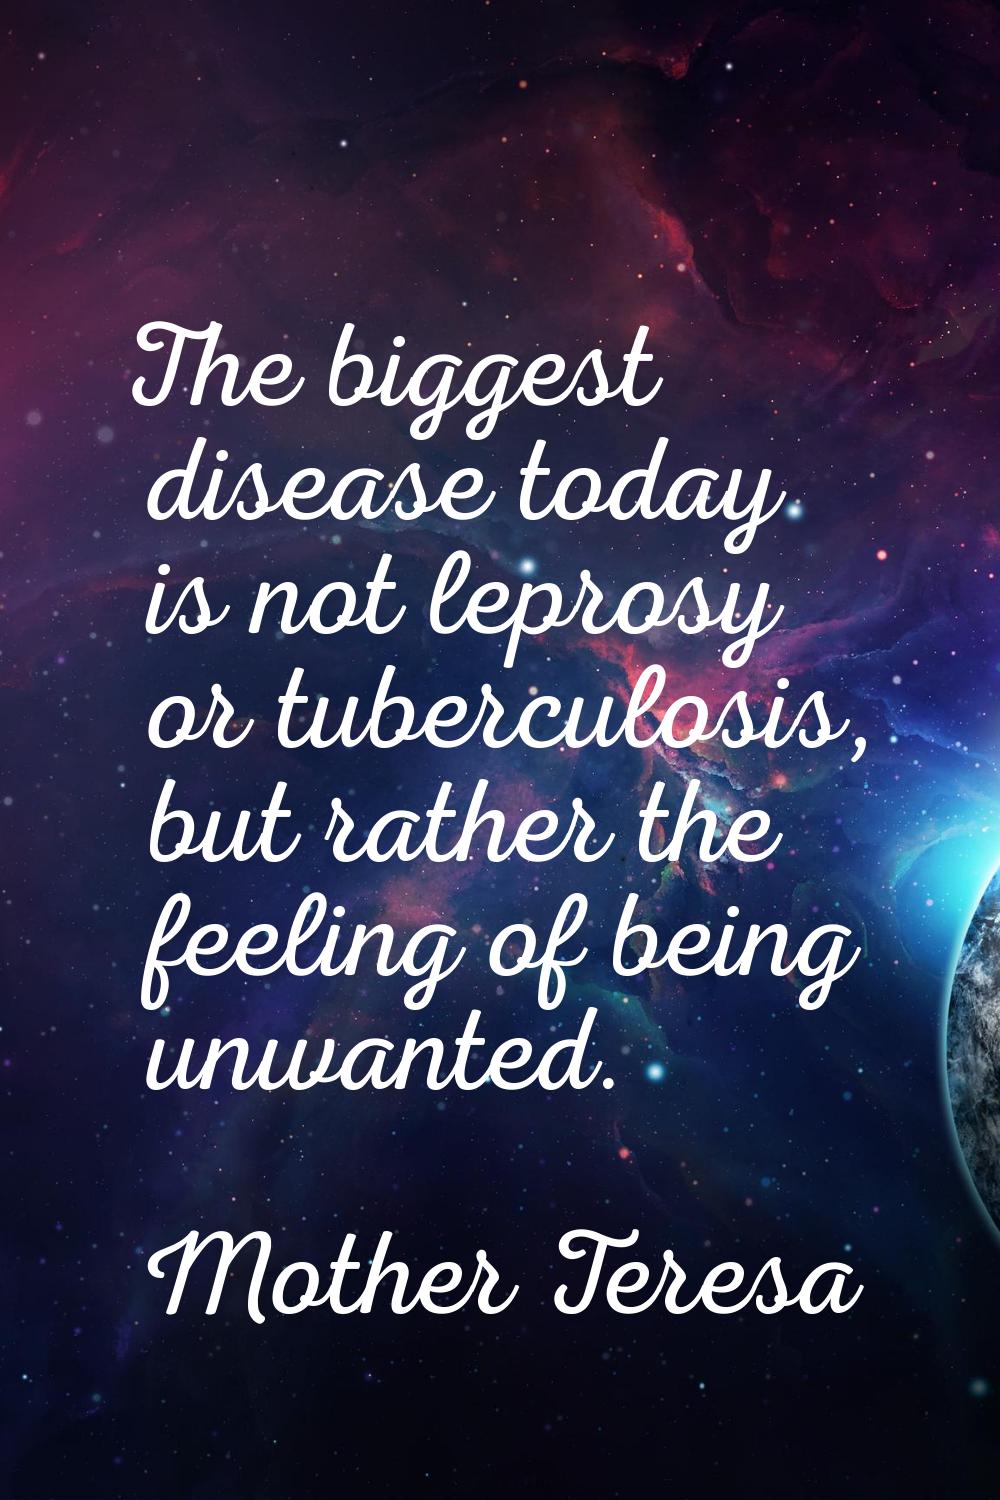 The biggest disease today is not leprosy or tuberculosis, but rather the feeling of being unwanted.